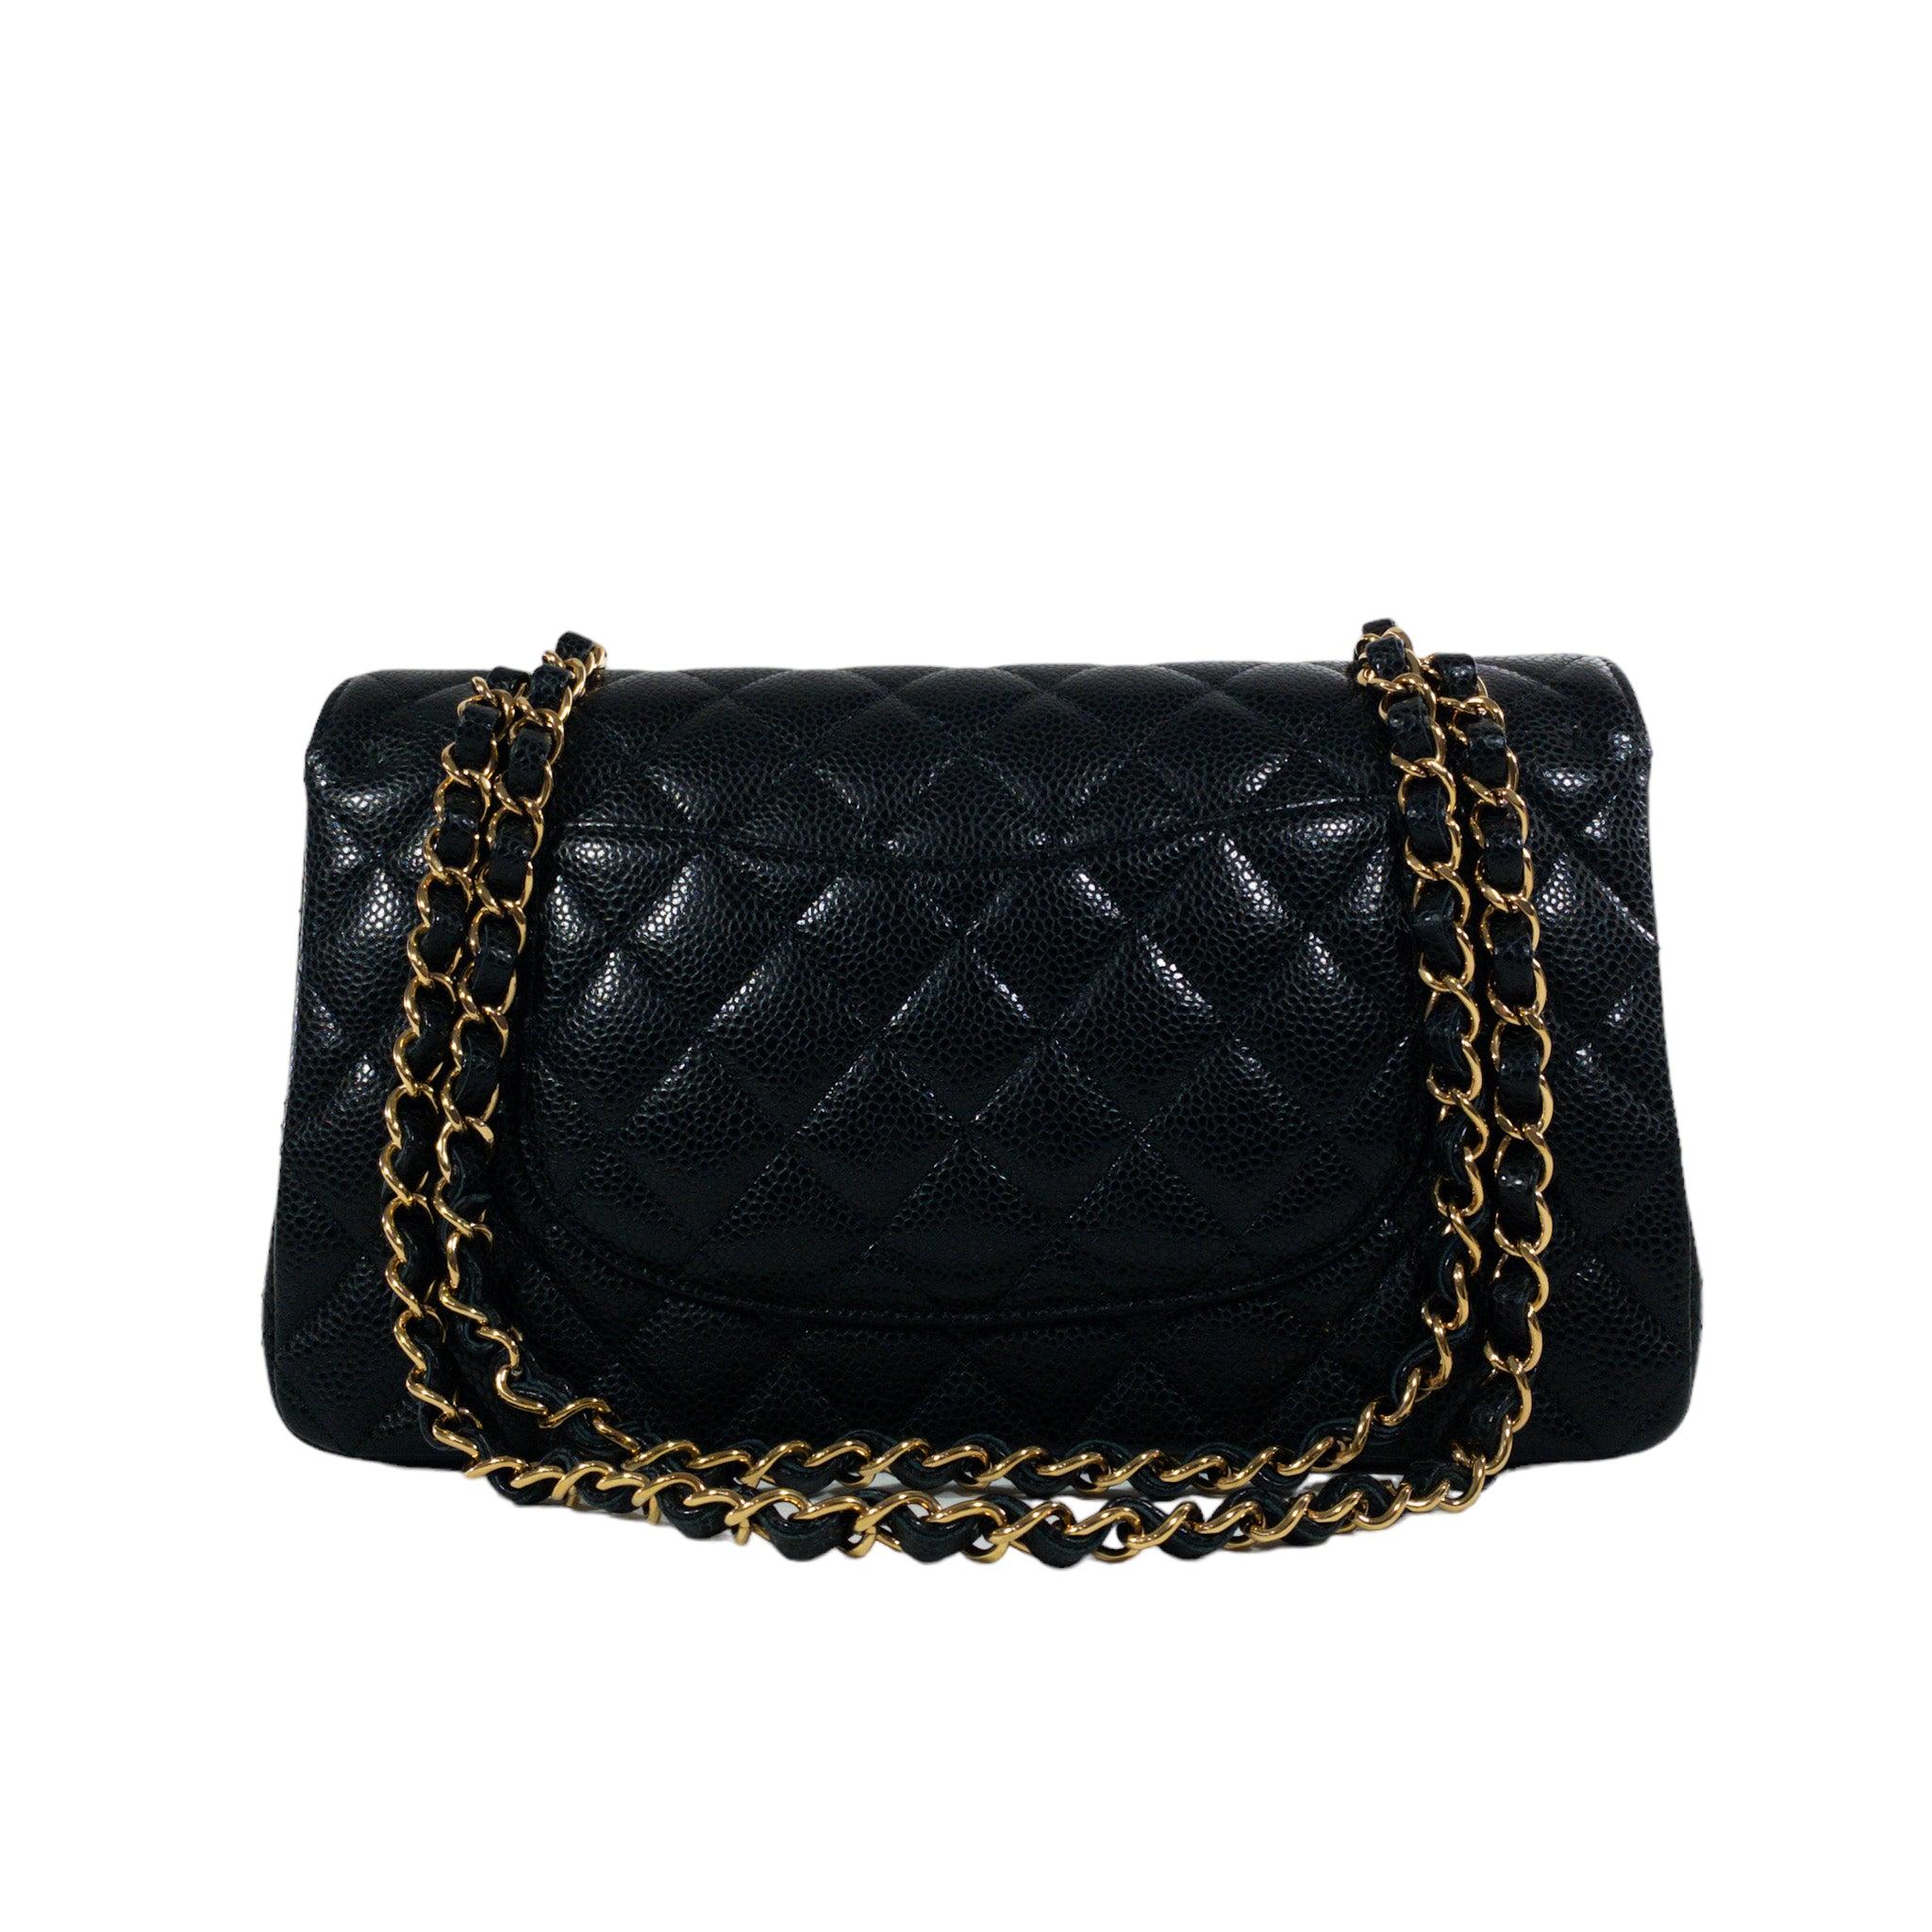 Consign of the Times presents this stunning Chanel Black Caviar Medium Classic Flap GHW.

This is an authentic Chanel Medium Classic Flap. The bag has a flap closure with a Double C logo turn lock. The interior is leather and includes one slip